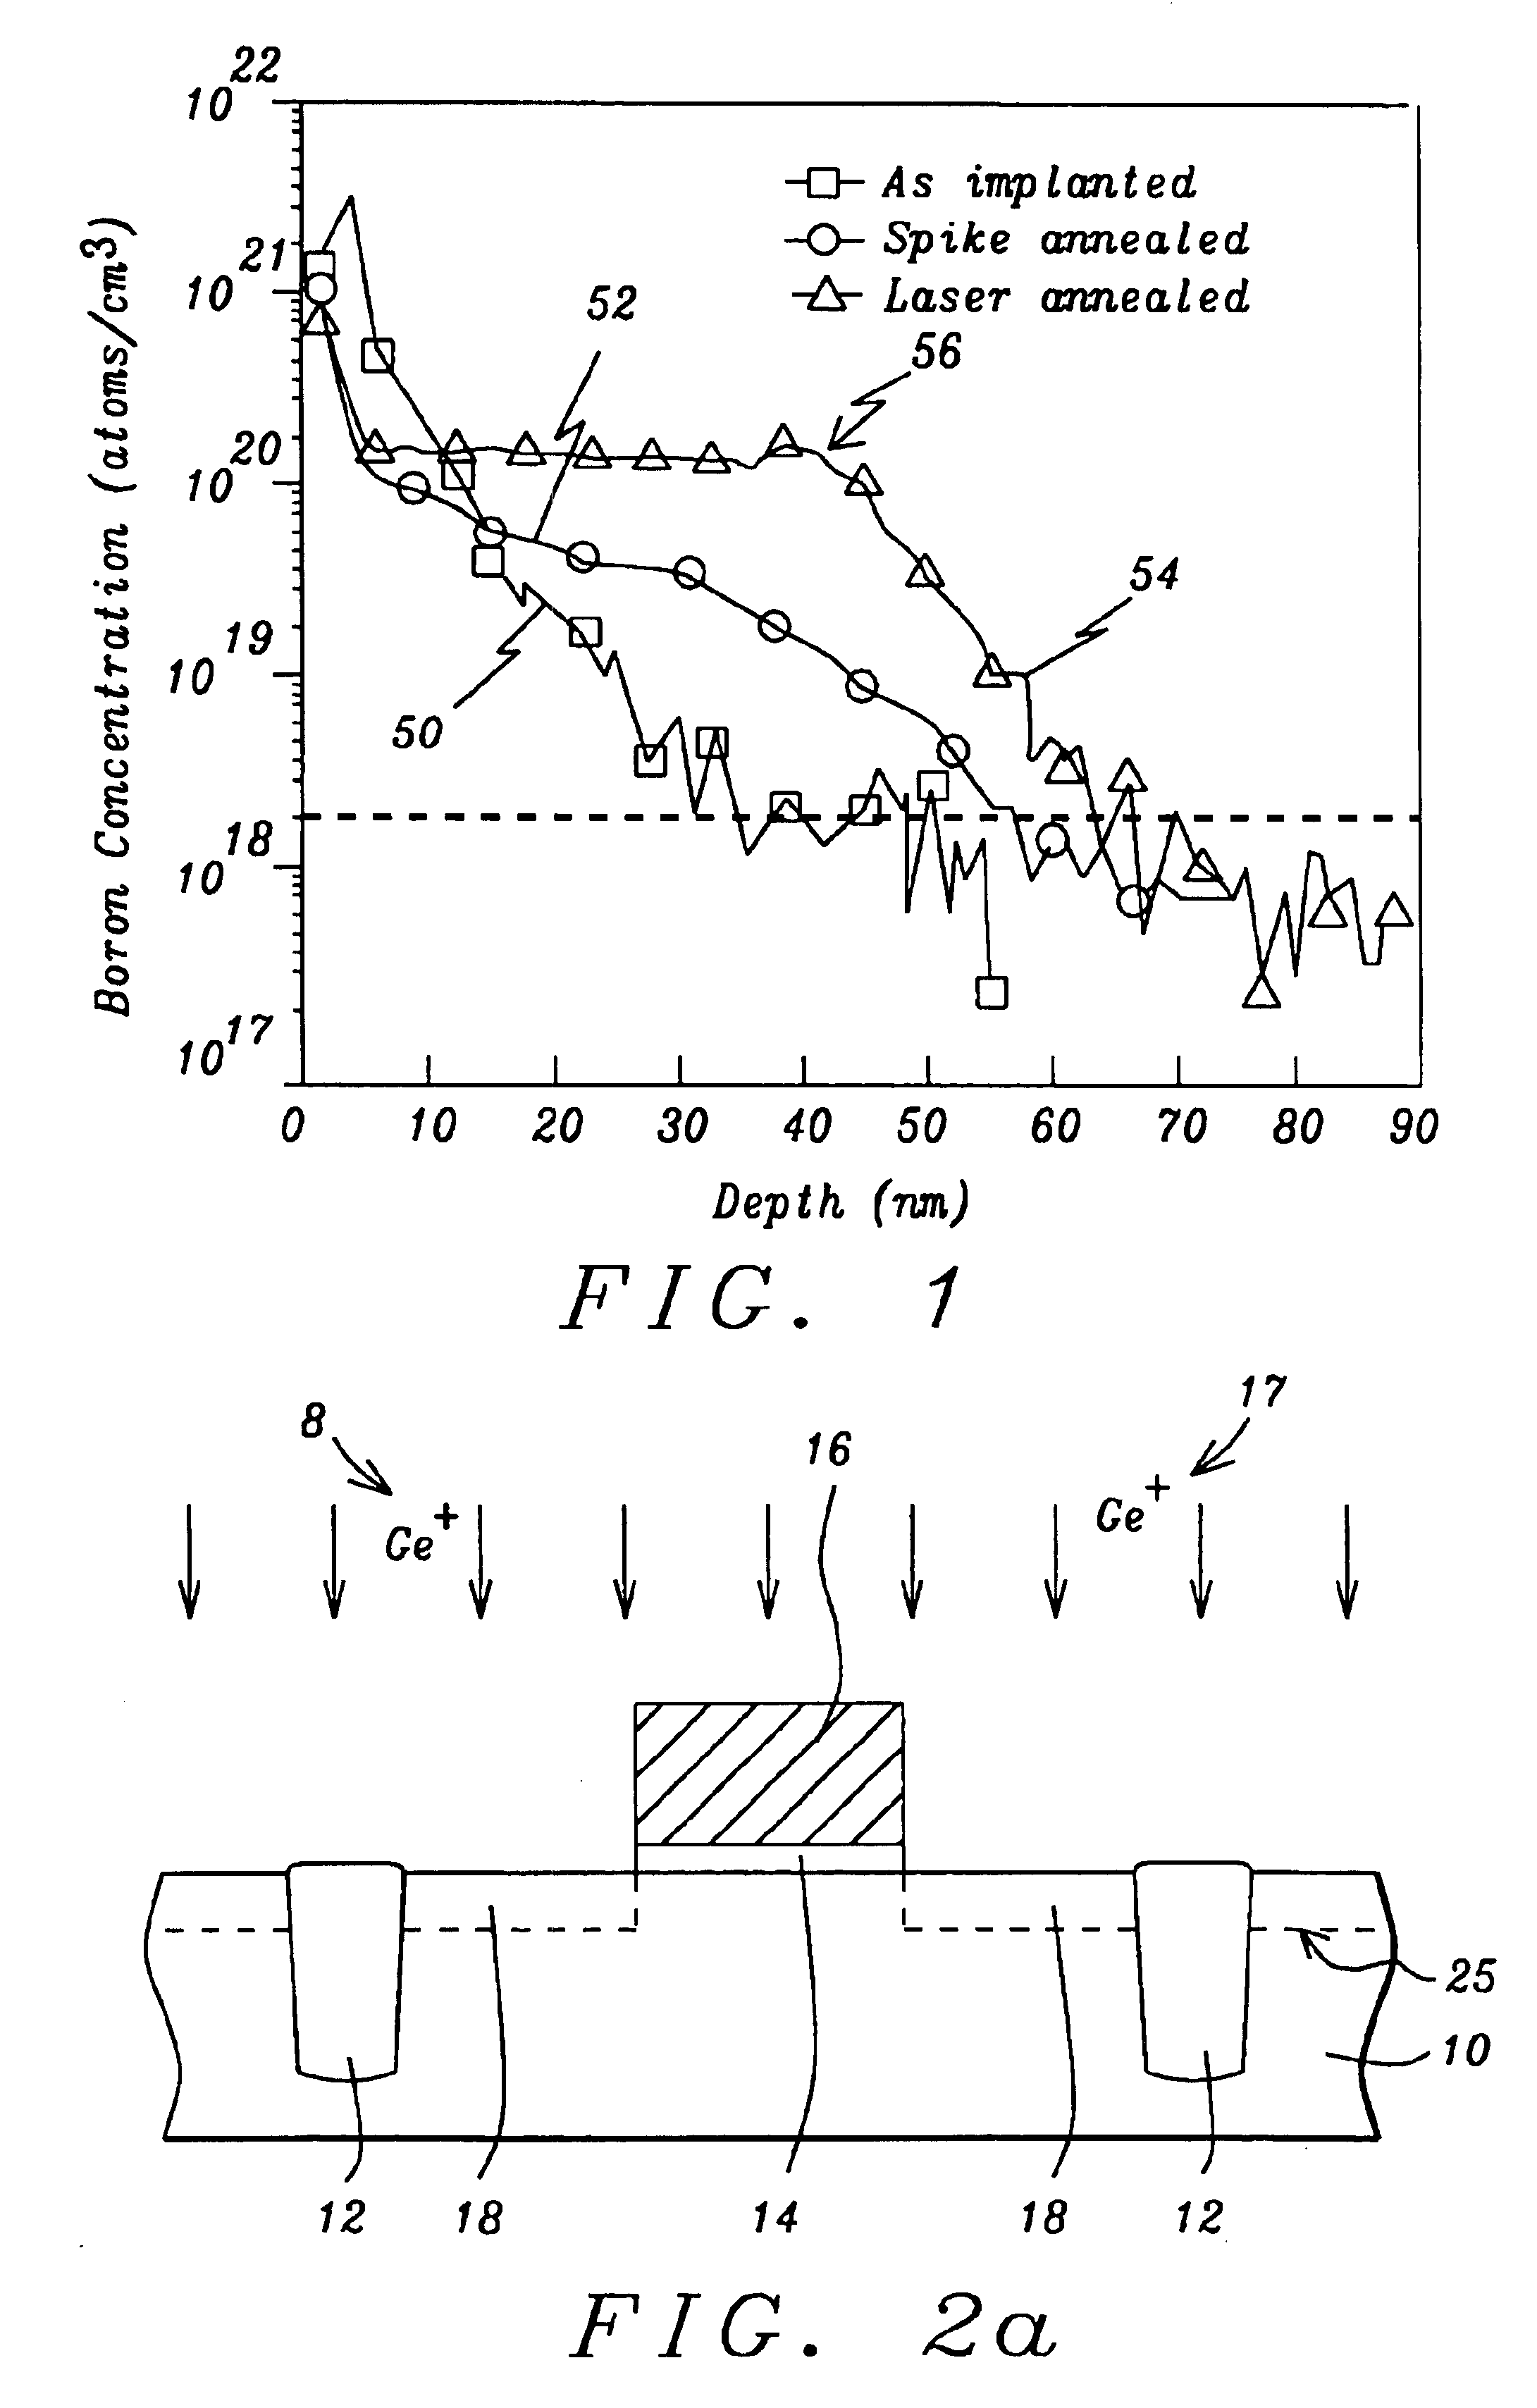 Method of multiple pulse laser annealing to activate ultra-shallow junctions